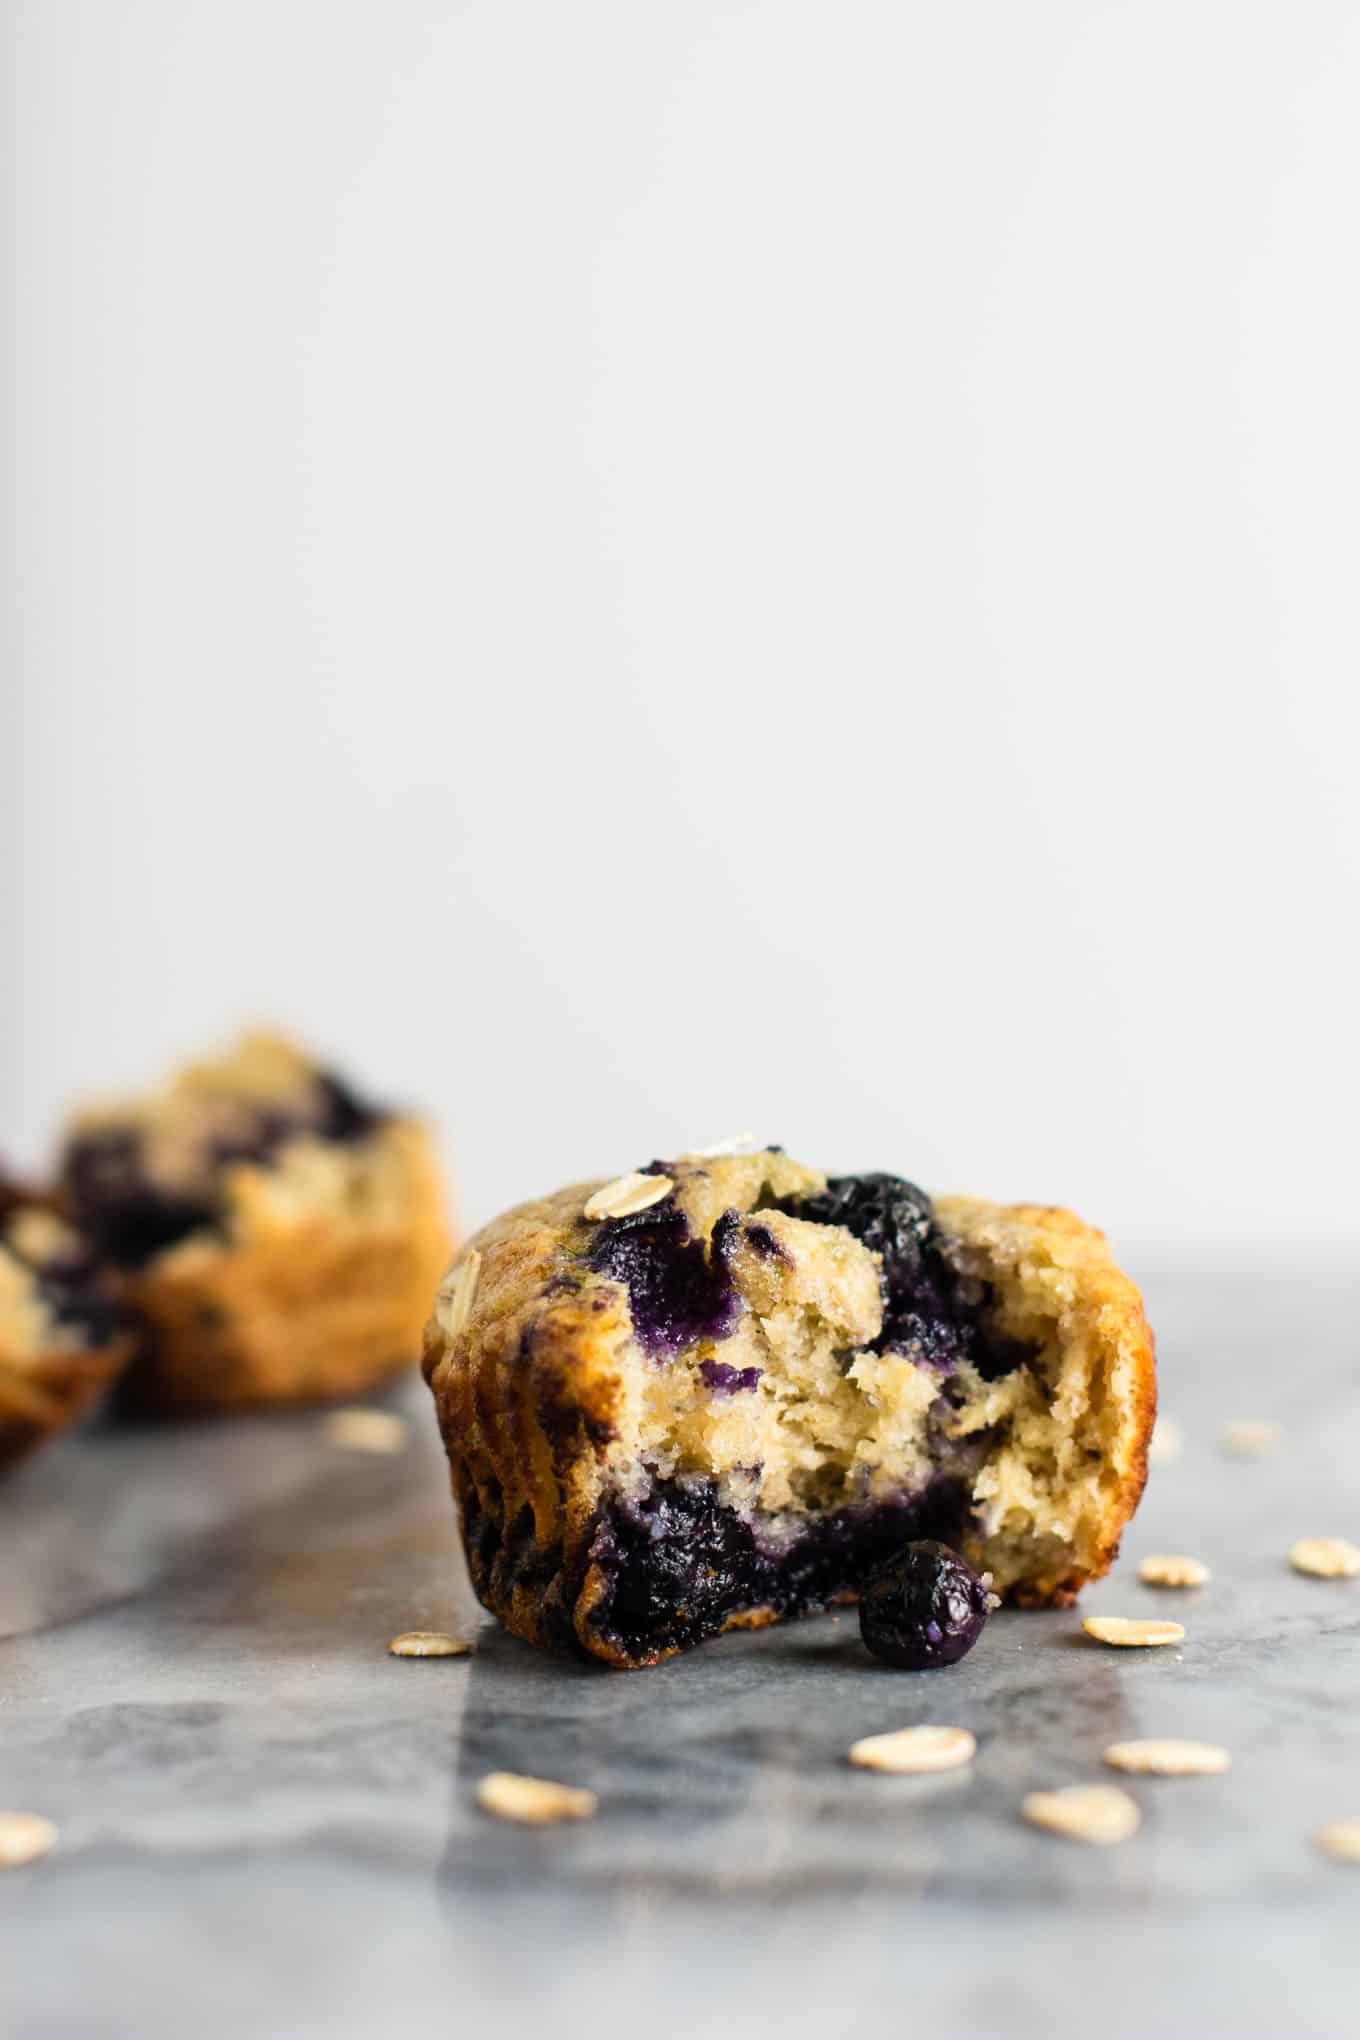 Healthy Blueberry Muffins with greek yogurt and coconut oil. Melt in your mouth crazy delicious! A protein packed healthy breakfast on the go. #healthyblueberrymuffins #blueberrymuffins #breakfast #greekyogurt #healthybreakfast